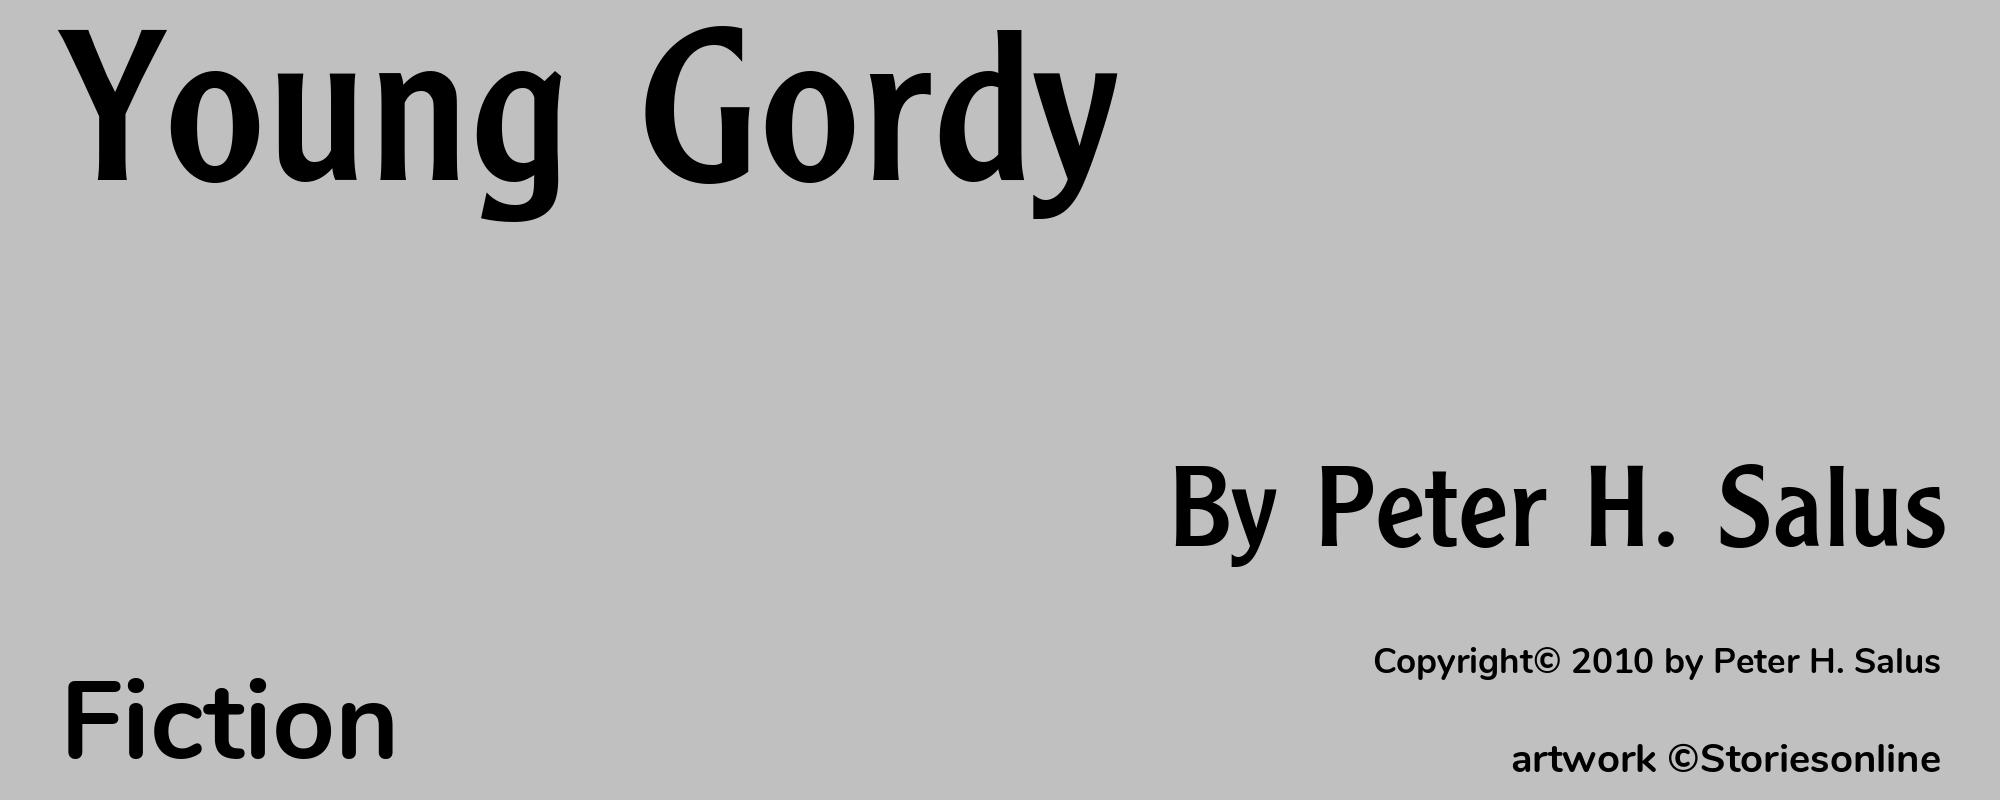 Young Gordy - Cover